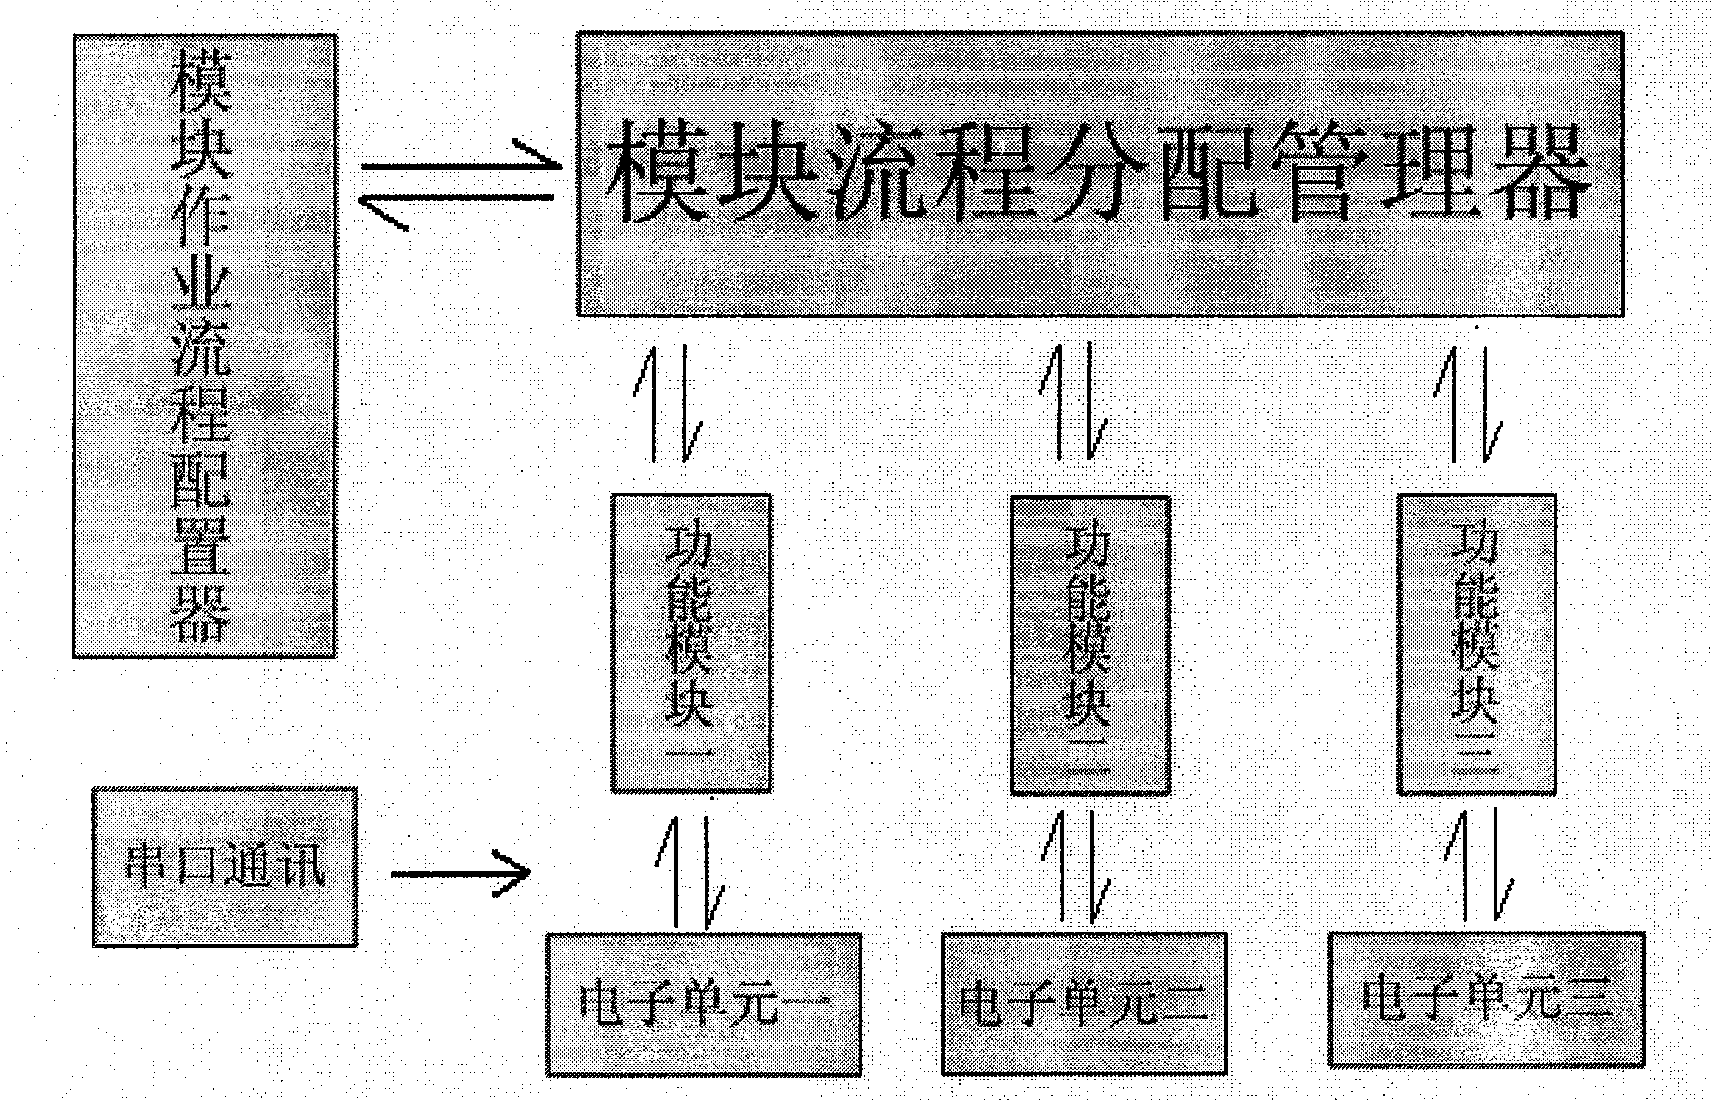 Control method of system realizing multi-module combined work